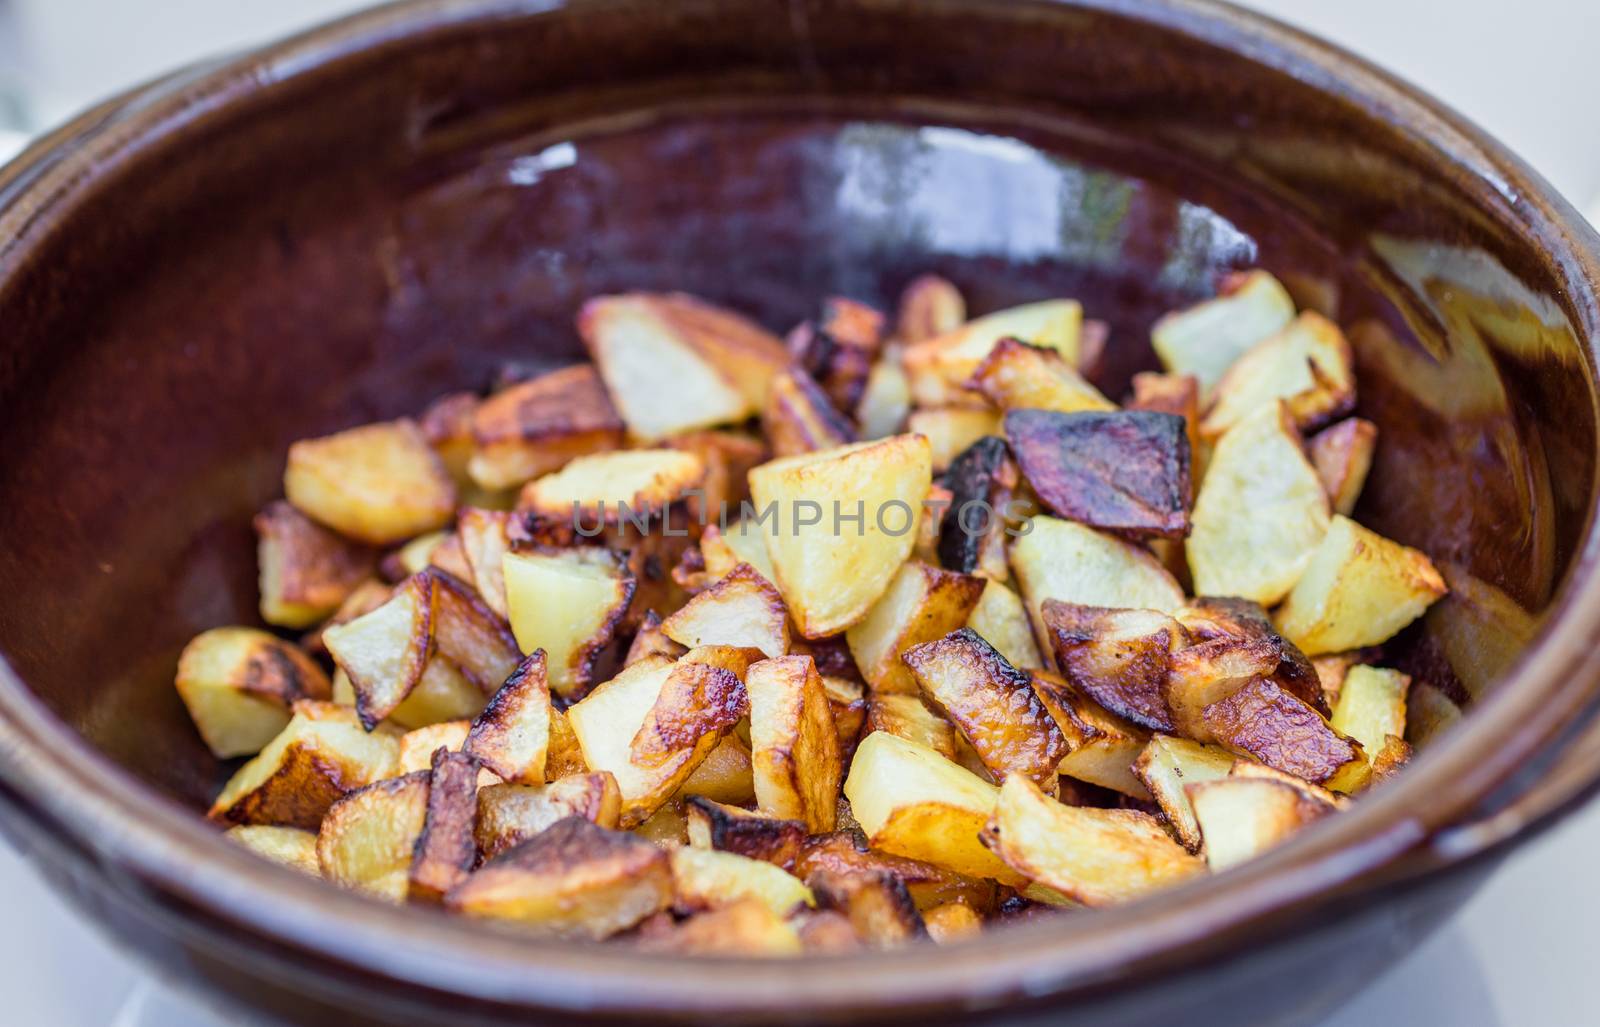 delicious roasted potato in bowl on table